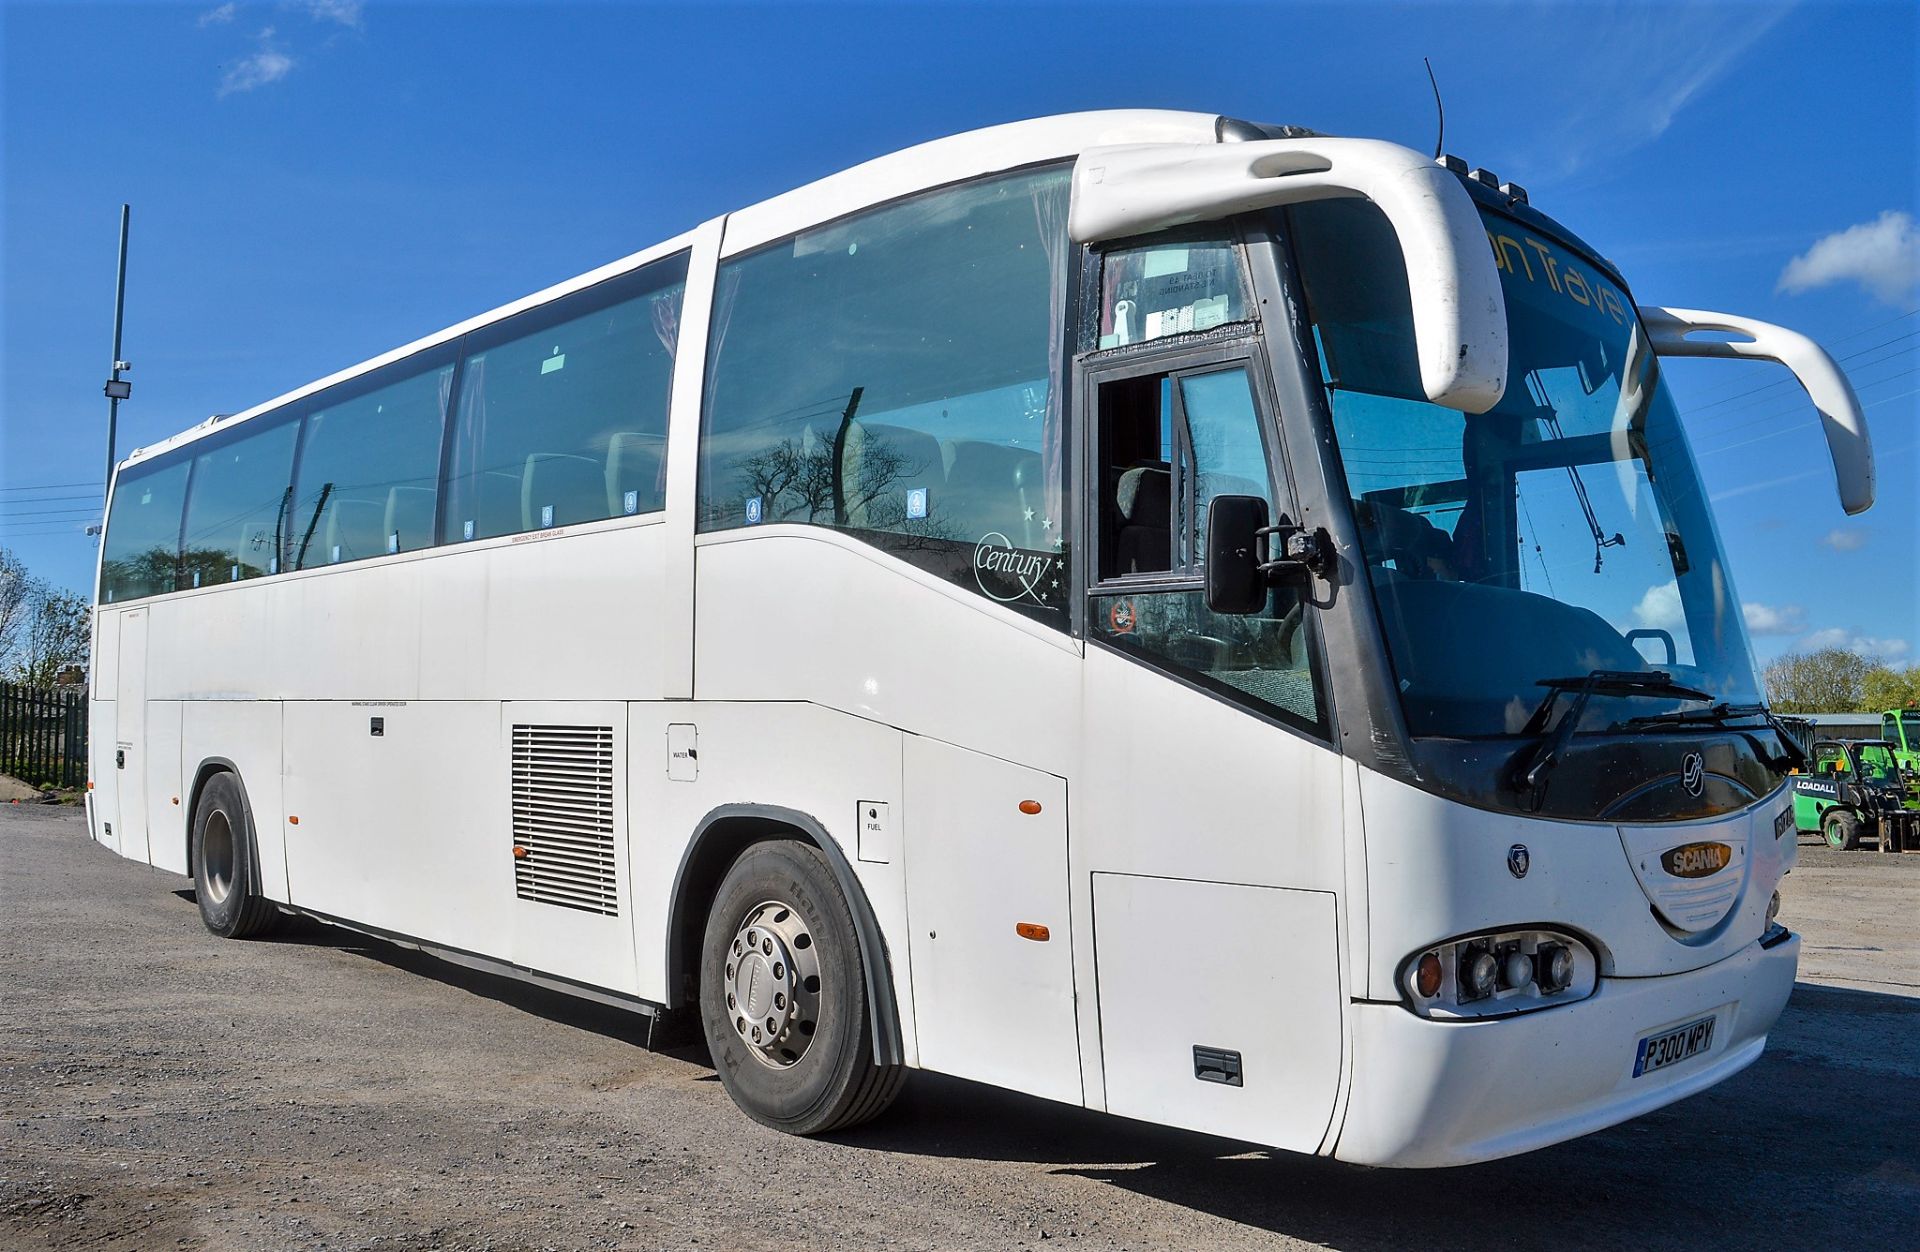 Scania Irizar Century 49 seat luxury coach Registration Number: P300 MPY Date of registration: 04/ - Image 2 of 12